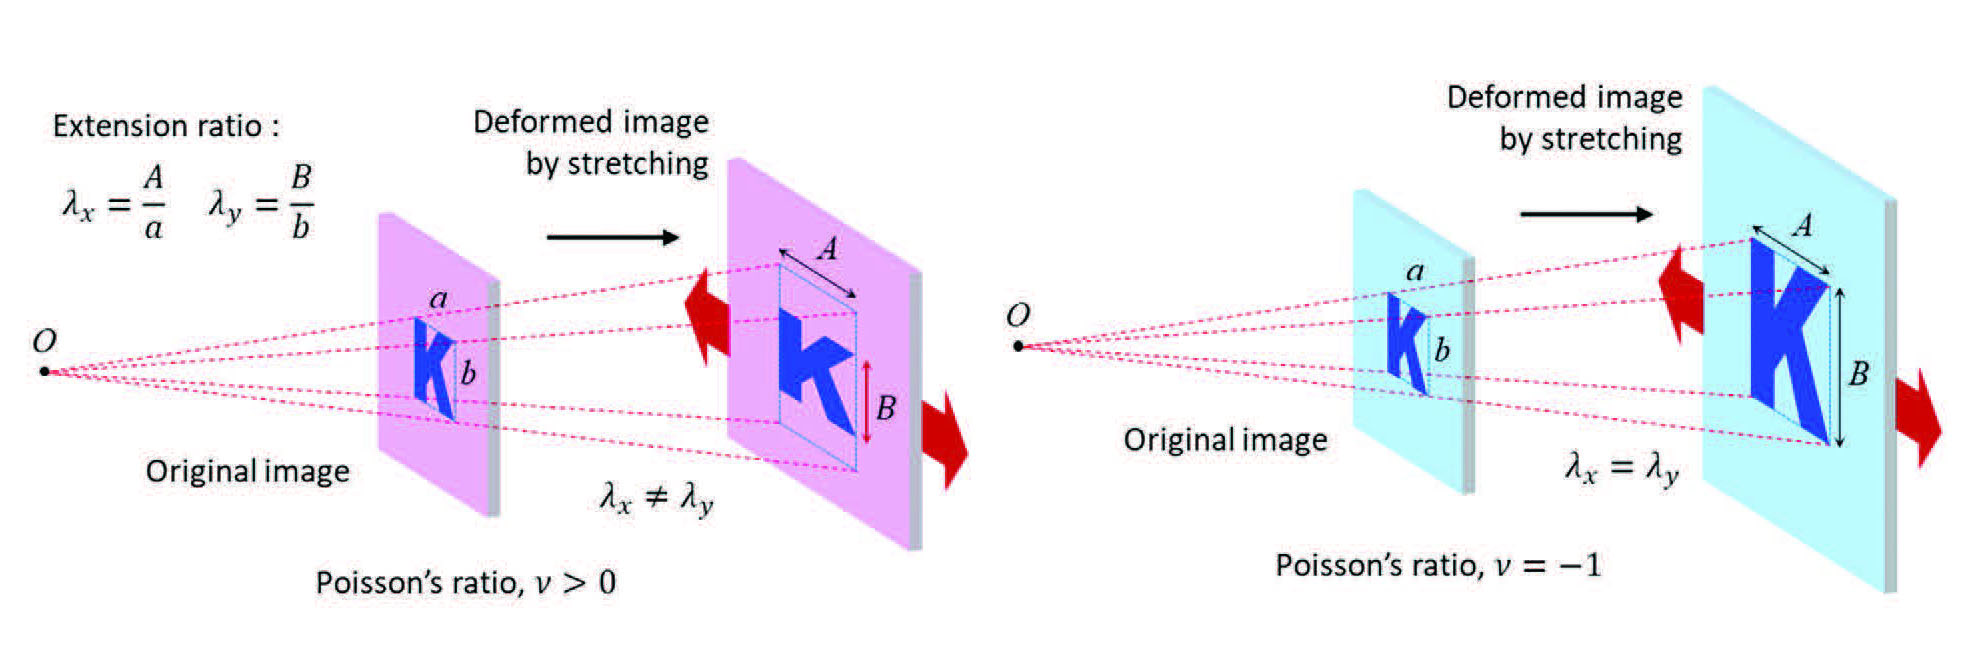 Deformed image by the base material with positive Poisson’s ratio and Poisson’s ratio of −1